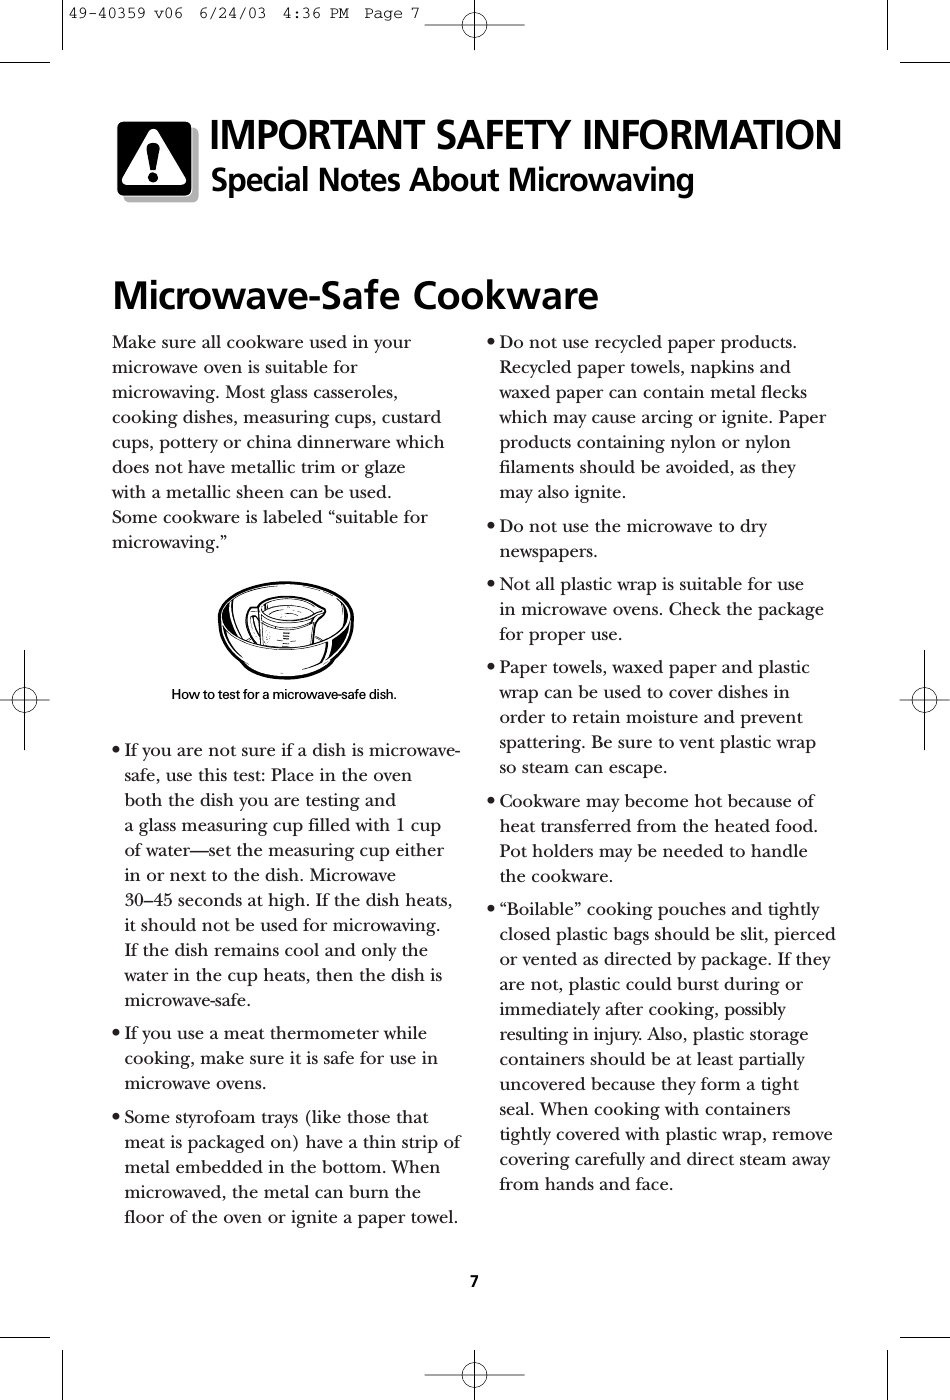 Make sure all cookware used in yourmicrowave oven is suitable formicrowaving. Most glass casseroles,cooking dishes, measuring cups, custardcups, pottery or china dinnerware whichdoes not have metallic trim or glaze with a metallic sheen can be used. Some cookware is labeled “suitable formicrowaving.”•If you are not sure if a dish is microwave-safe, use this test: Place in the oven both the dish you are testing and a glass measuring cup filled with 1 cupof water—set the measuring cup eitherin or next to the dish. Microwave 30–45 seconds at high. If the dish heats,it should not be used for microwaving. If the dish remains cool and only thewater in the cup heats, then the dish ismicrowave-safe.•If you use a meat thermometer whilecooking, make sure it is safe for use inmicrowave ovens.•Some styrofoam trays (like those thatmeat is packaged on) have a thin strip ofmetal embedded in the bottom. Whenmicrowaved, the metal can burn thefloor of the oven or ignite a paper towel.•Do not use recycled paper products.Recycled paper towels, napkins andwaxed paper can contain metal fleckswhich may cause arcing or ignite. Paperproducts containing nylon or nylonfilaments should be avoided, as they may also ignite. •Do not use the microwave to drynewspapers.•Not all plastic wrap is suitable for use in microwave ovens. Check the packagefor proper use.•Paper towels, waxed paper and plasticwrap can be used to cover dishes in order to retain moisture and preventspattering. Be sure to vent plastic wrap so steam can escape.•Cookware may become hot because ofheat transferred from the heated food.Pot holders may be needed to handlethe cookware.•“Boilable” cooking pouches and tightlyclosed plastic bags should be slit, piercedor vented as directed by package. If theyare not, plastic could burst during orimmediately after cooking, possiblyresulting in injury. Also, plastic storagecontainers should be at least partiallyuncovered because they form a tightseal. When cooking with containerstightly covered with plastic wrap, removecovering carefully and direct steam awayfrom hands and face.Microwave-Safe CookwareHow to test for a microwave-safe dish.7IMPORTANT SAFETY INFORMATIONSpecial Notes About Microwaving49-40359 v06  6/24/03  4:36 PM  Page 7